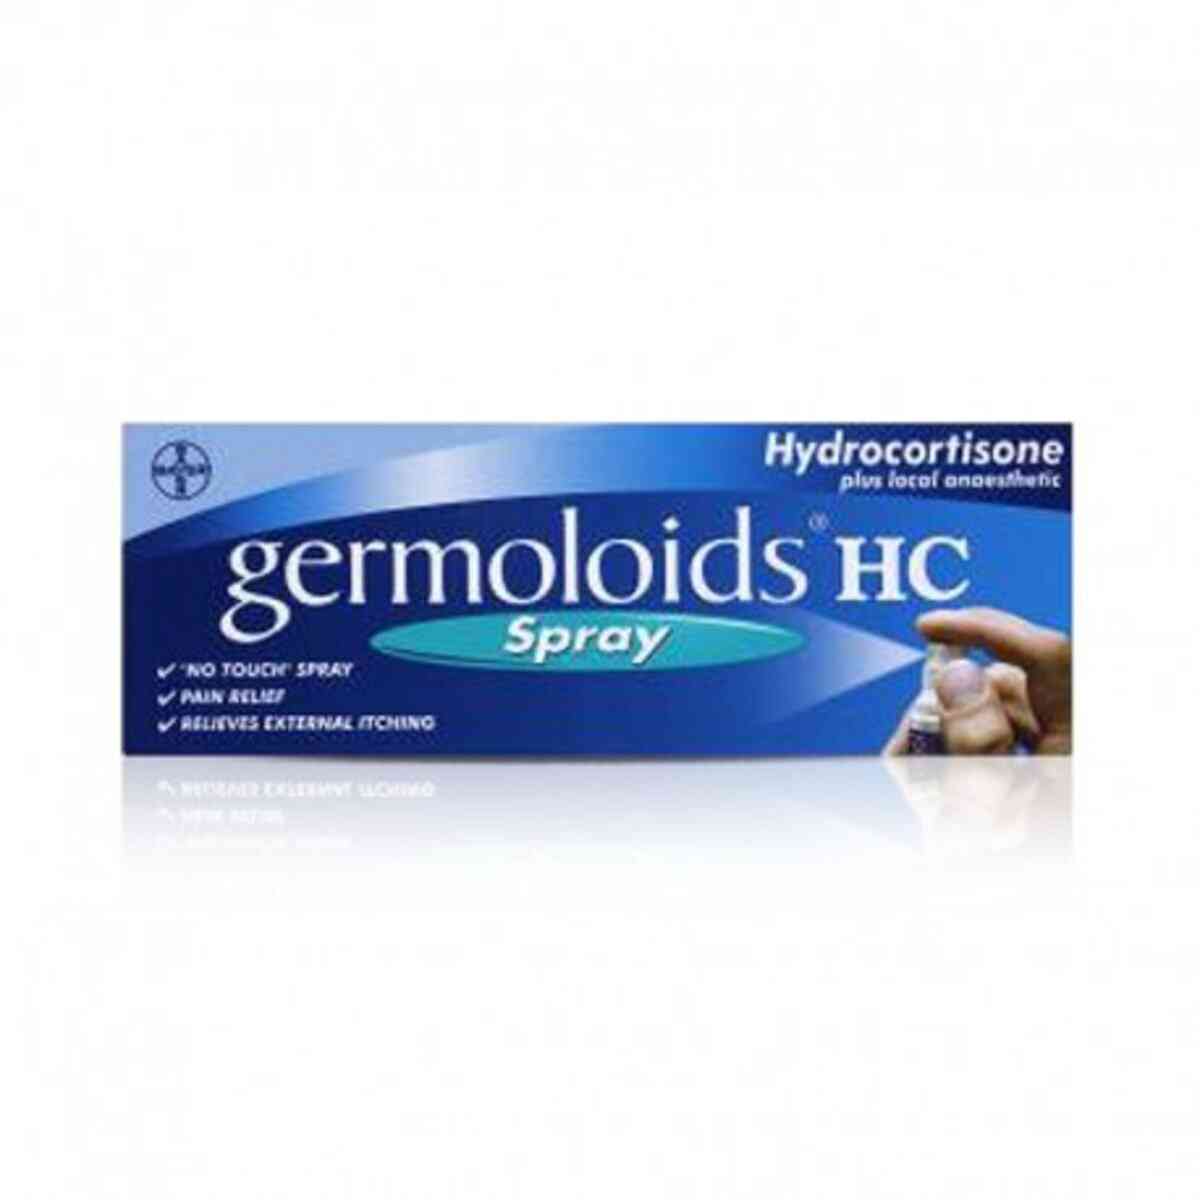 Germoloids Dual Action - 12 Suppositories - Pharmacy 24 Hours